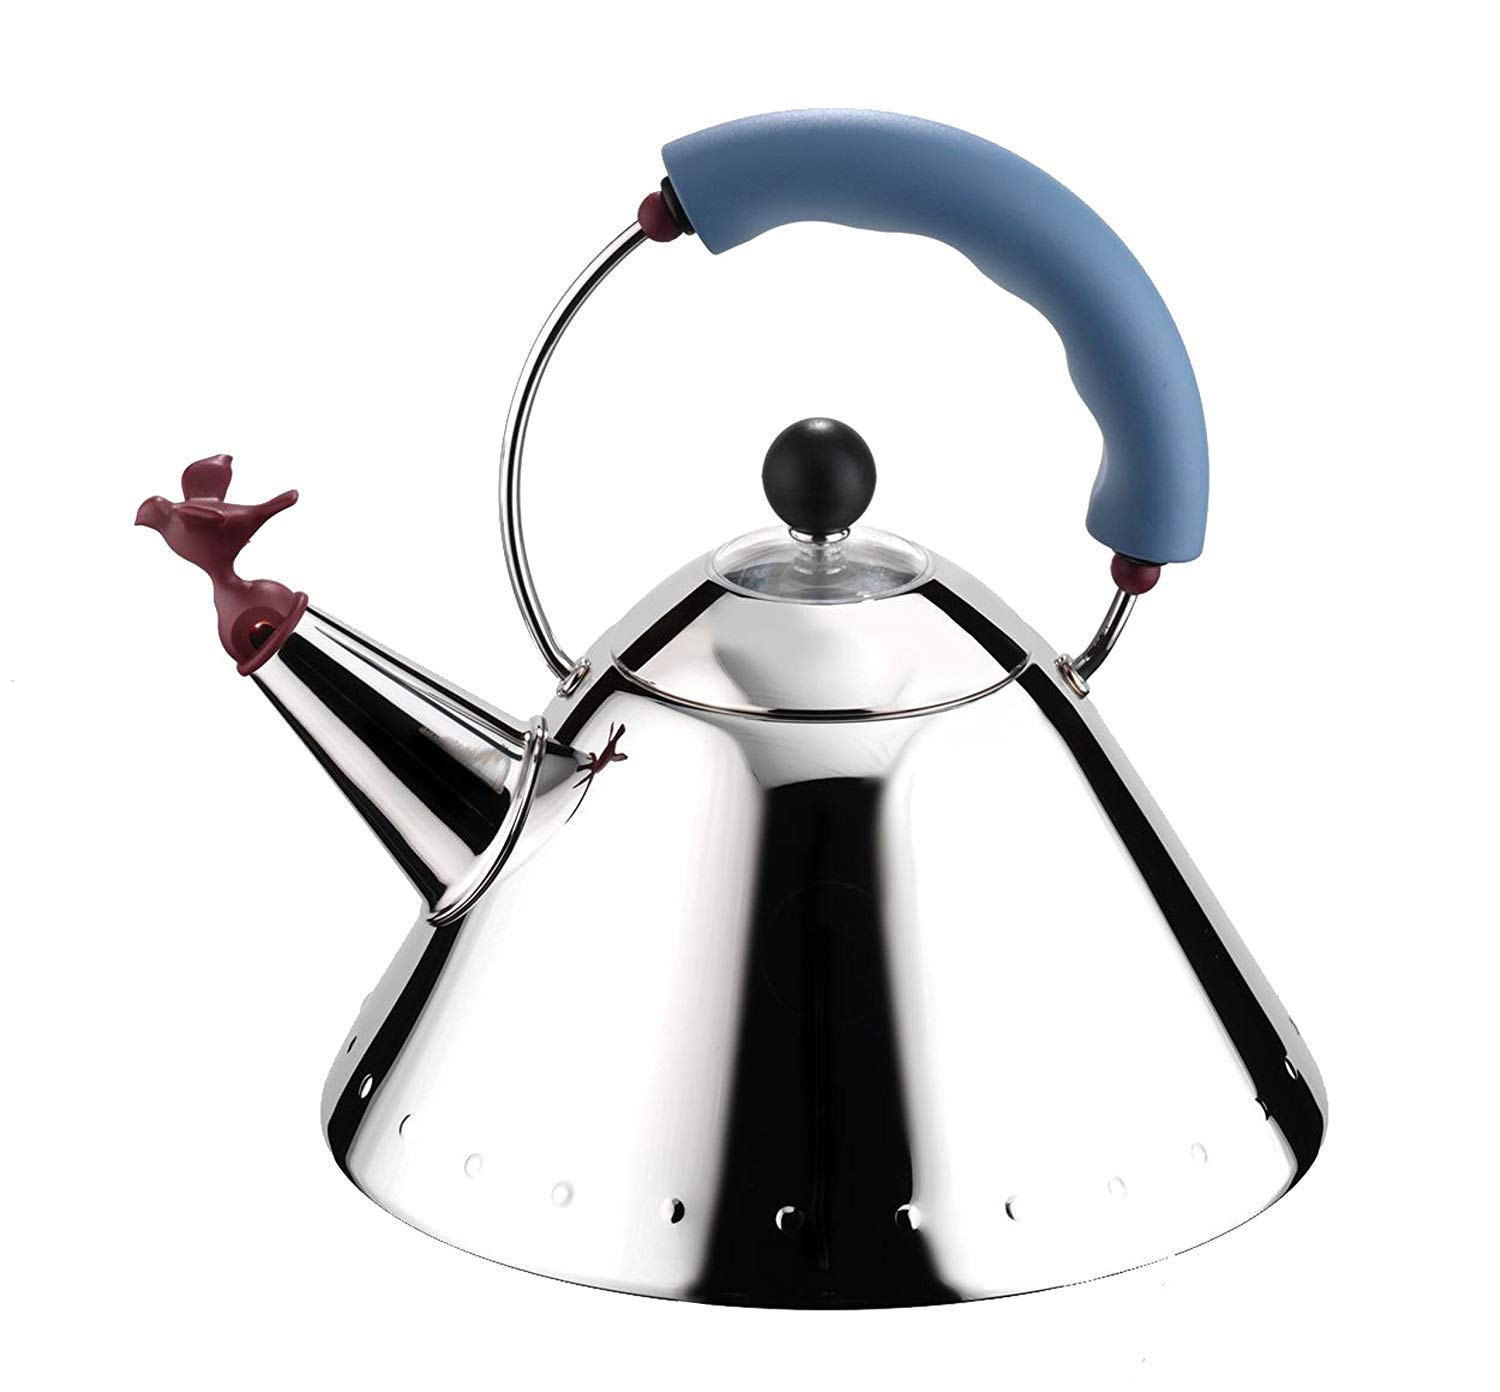  Alessi Michael Graves Kettle 